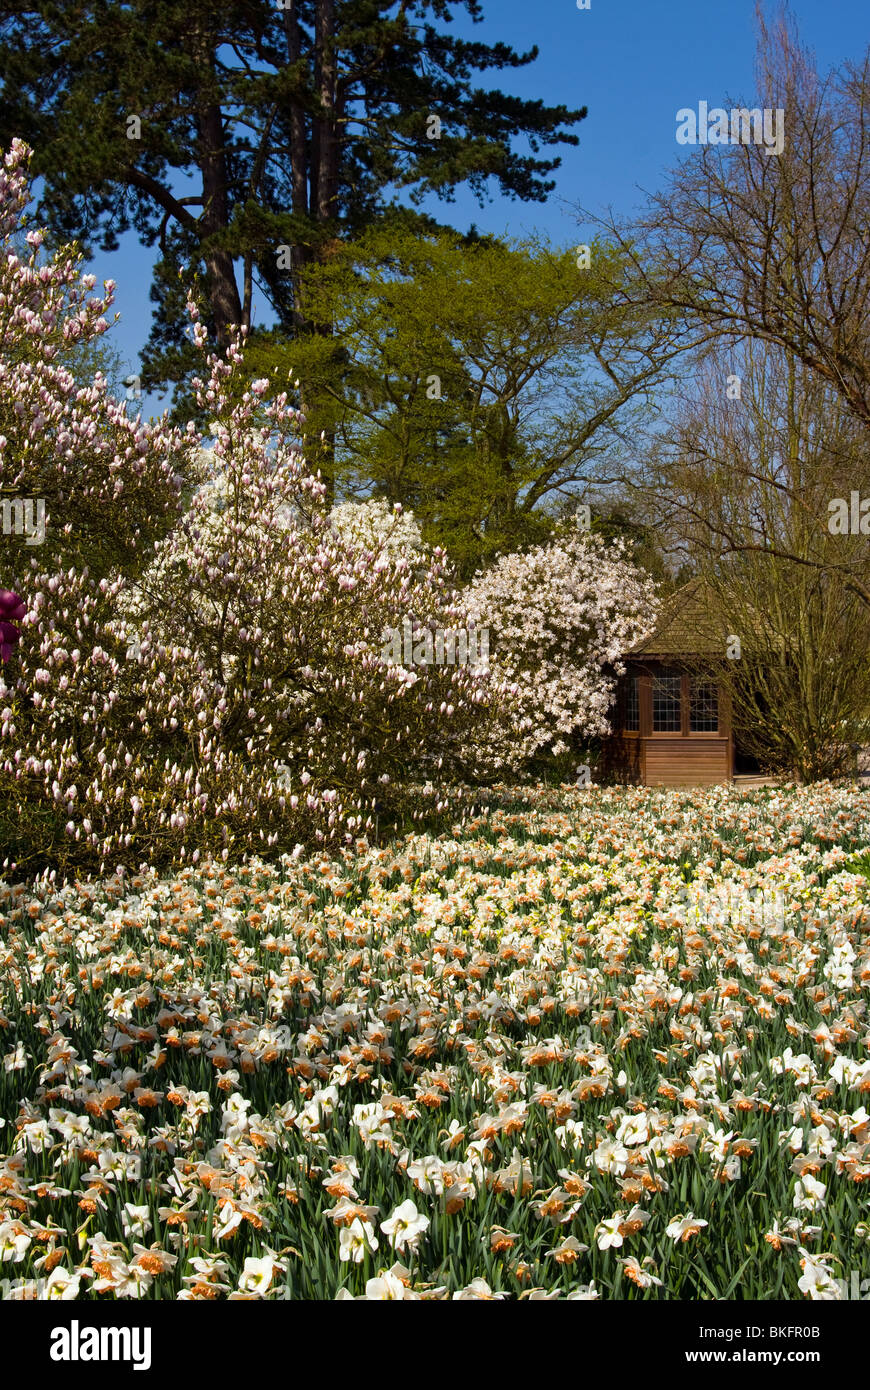 Magnolia Soulangeana and Stellata Rosea Trees In A Bed Of Daffodils RHS Wisley Gardens Surrey England Stock Photo